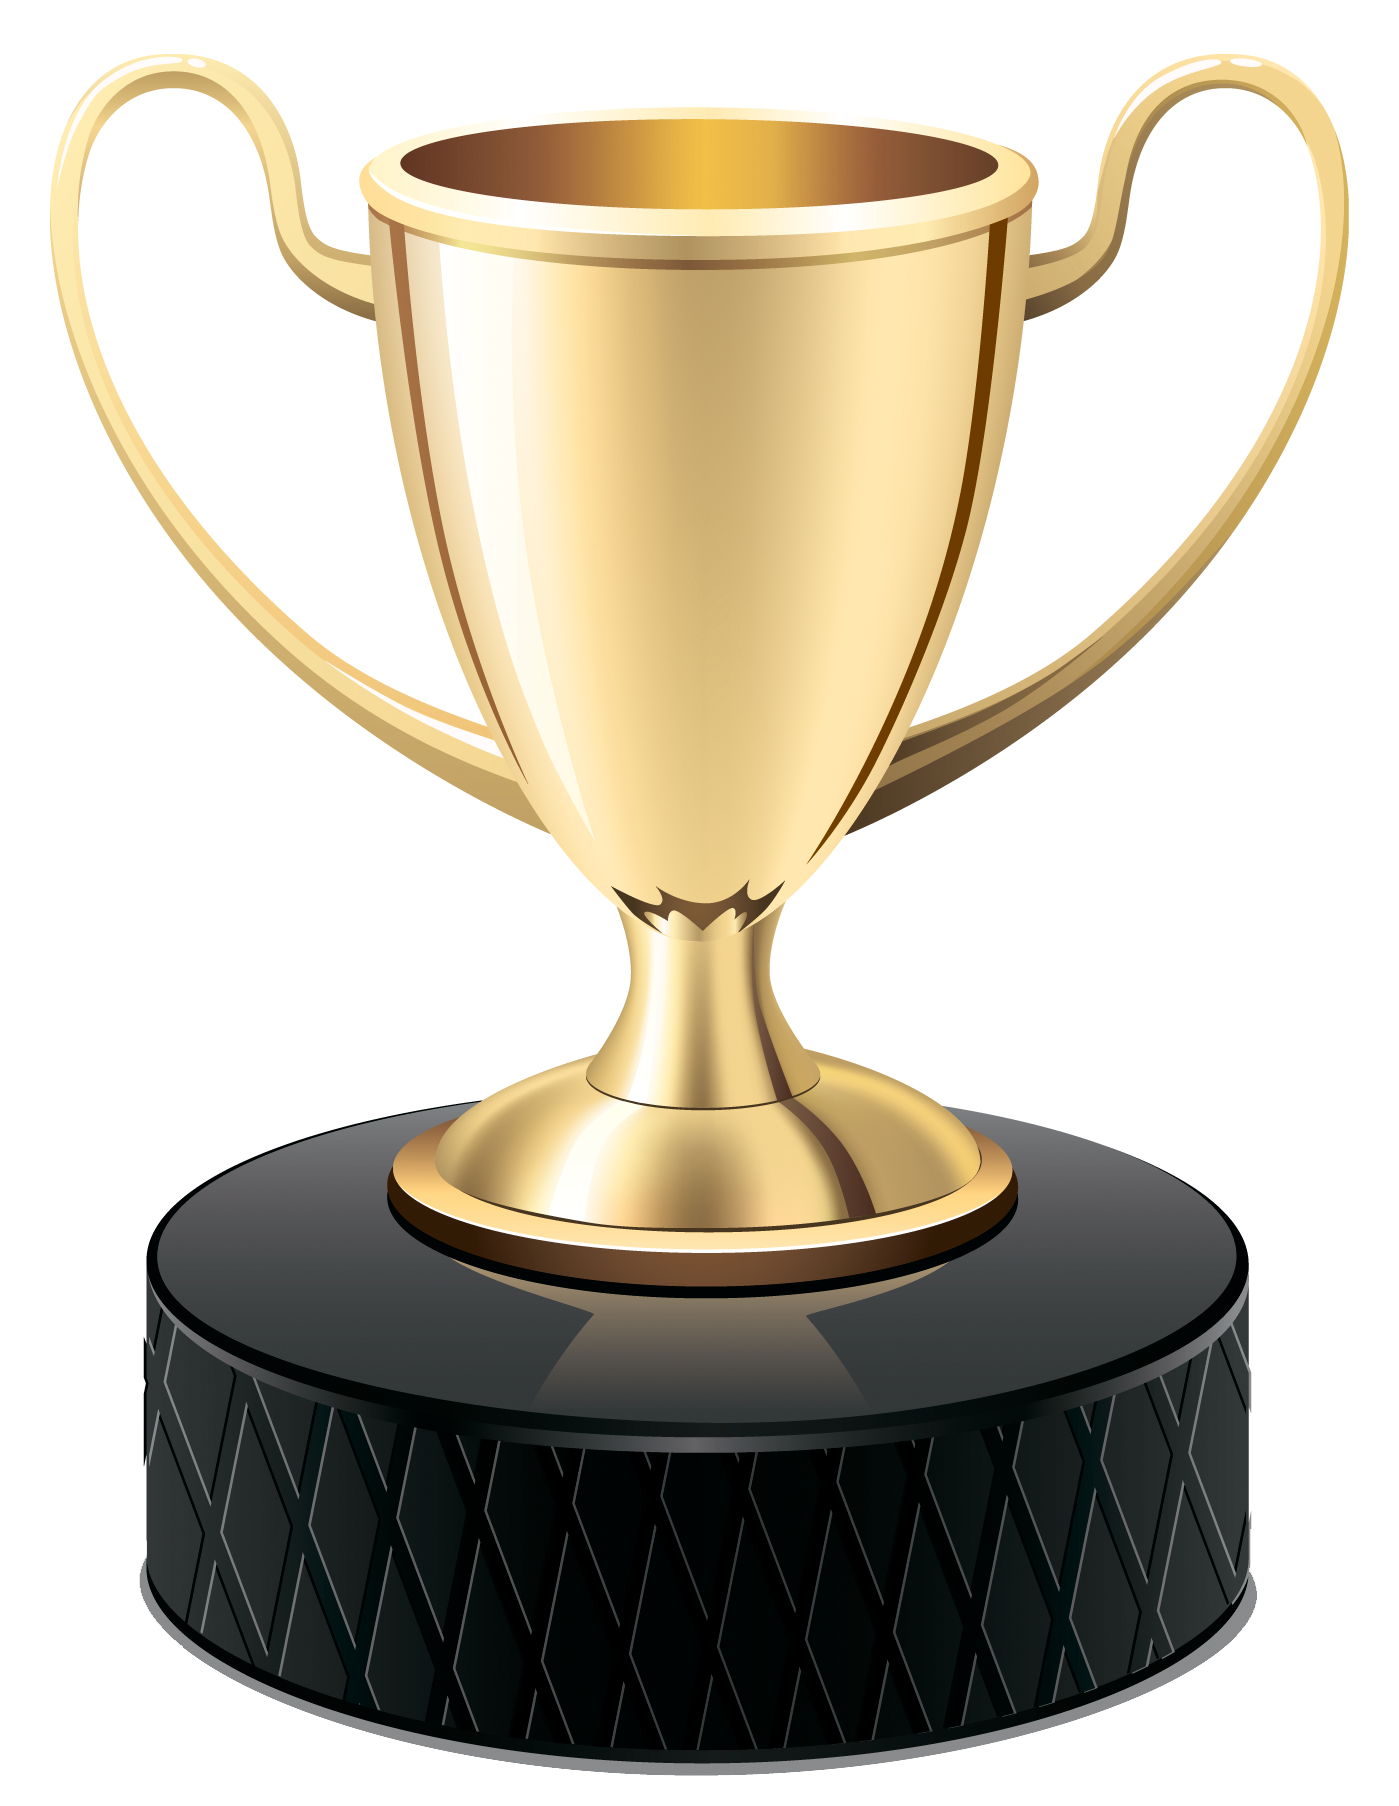 Download Golden Cup Trophy PNG Image for Free